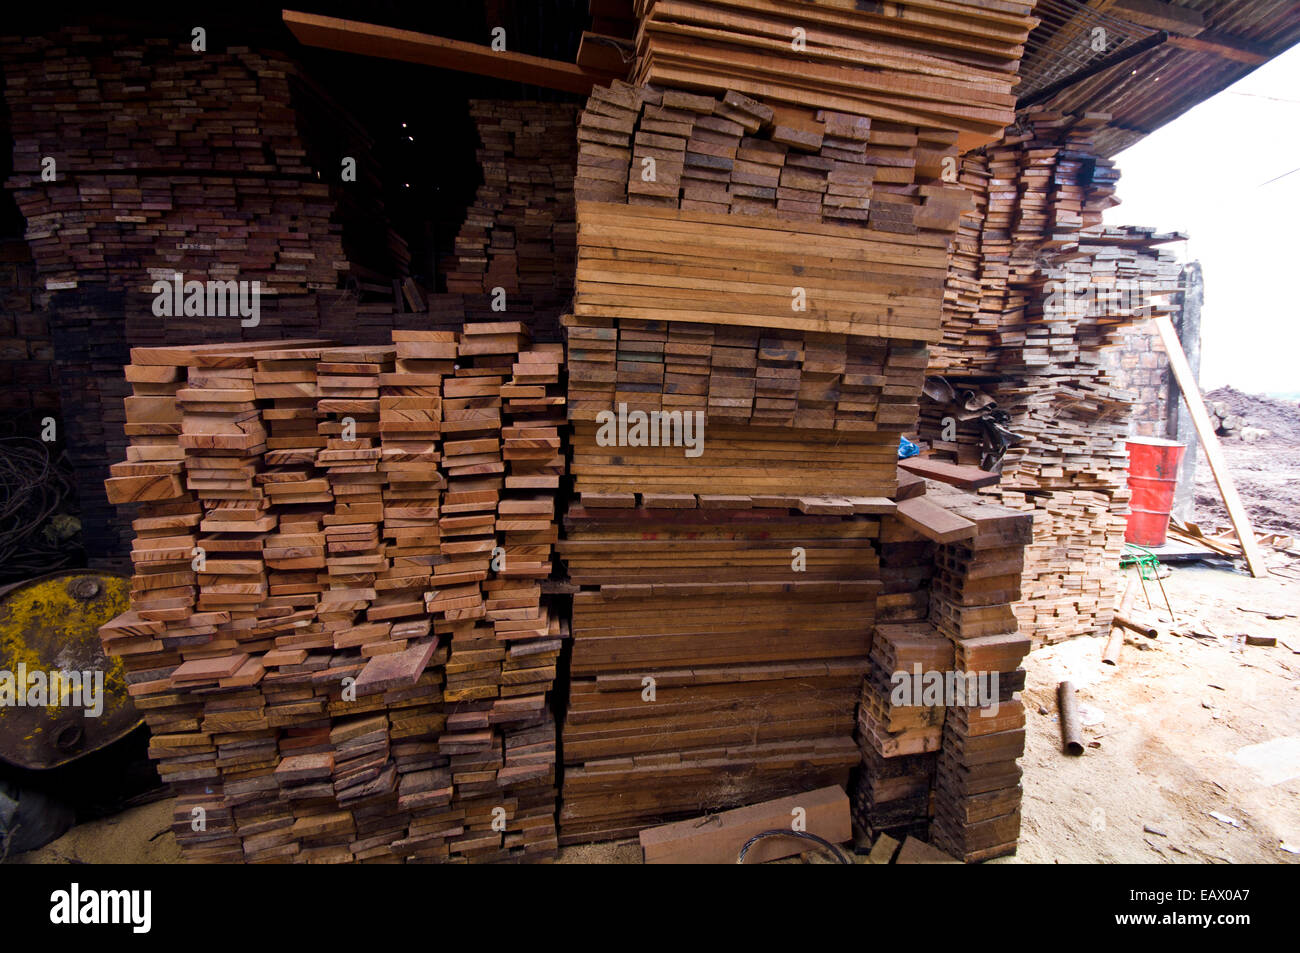 Timber slats cut from rainforest trees stacked for sale in a logging mill. Stock Photo